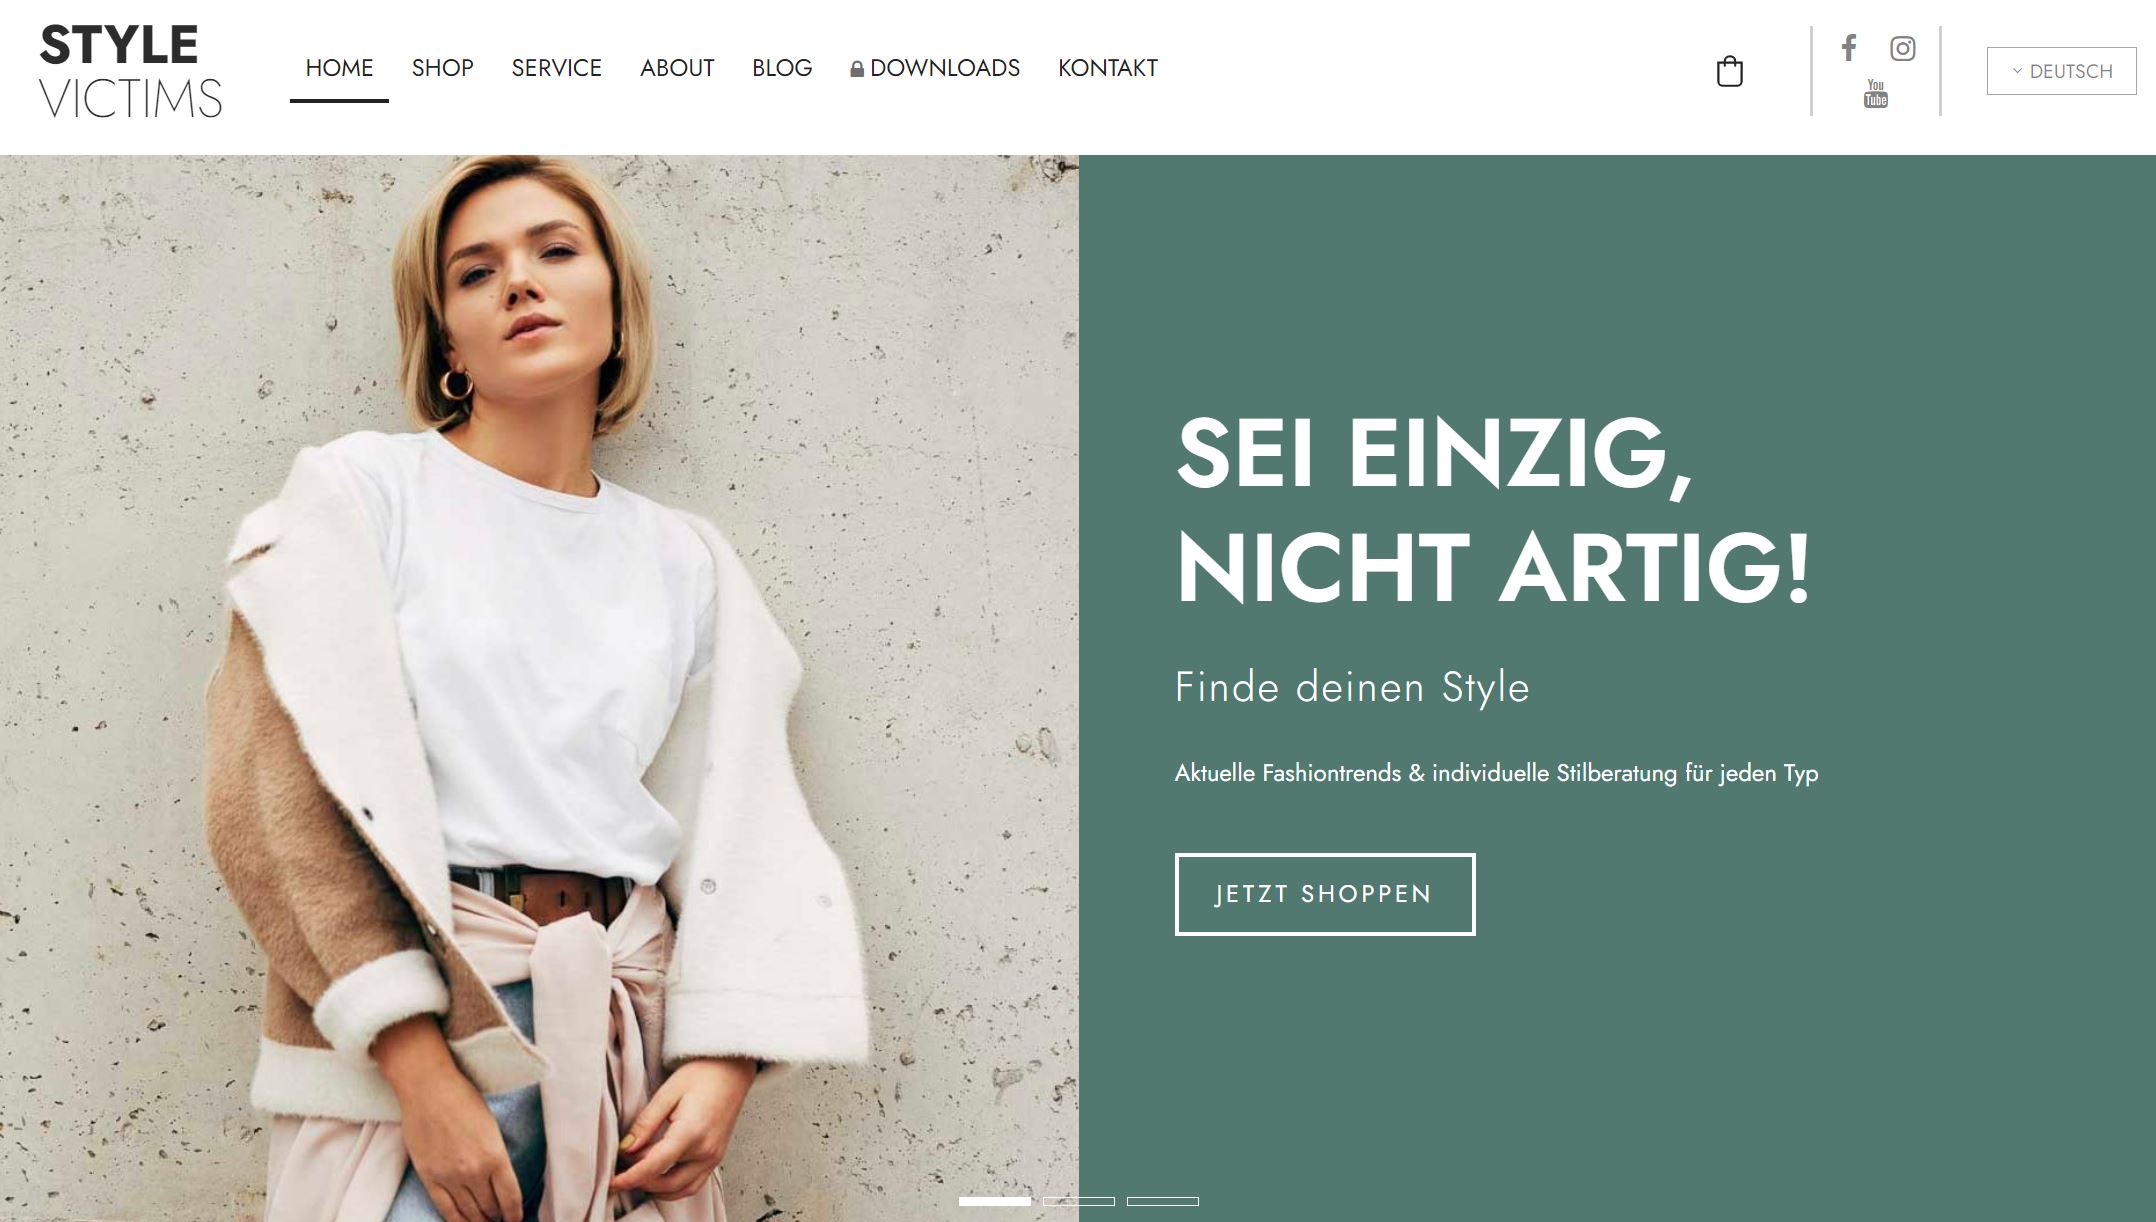 Style Victims website by Heise